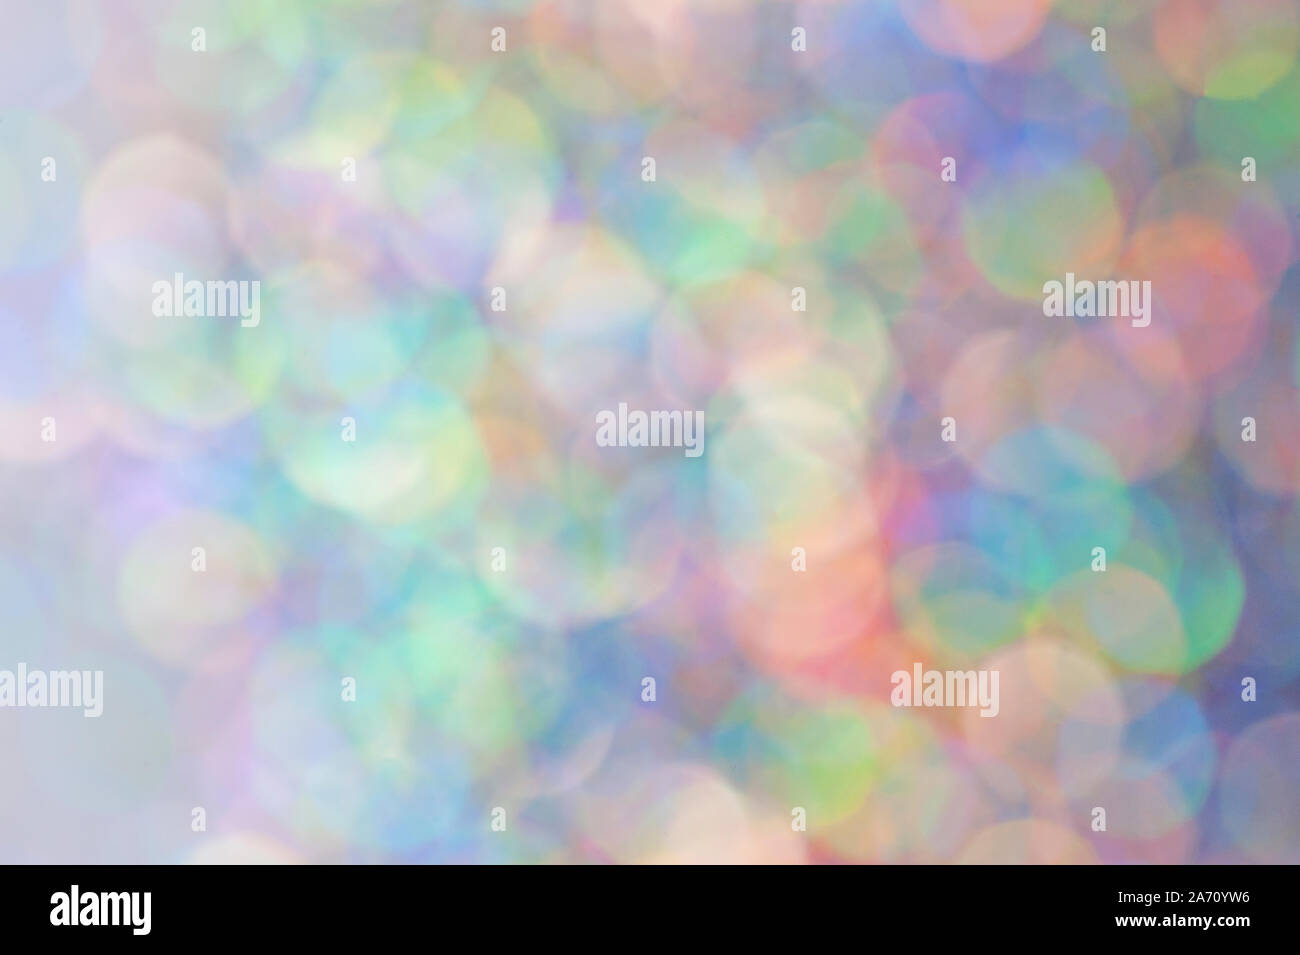 Abstract background of blurry unfocus lights Stock Photo